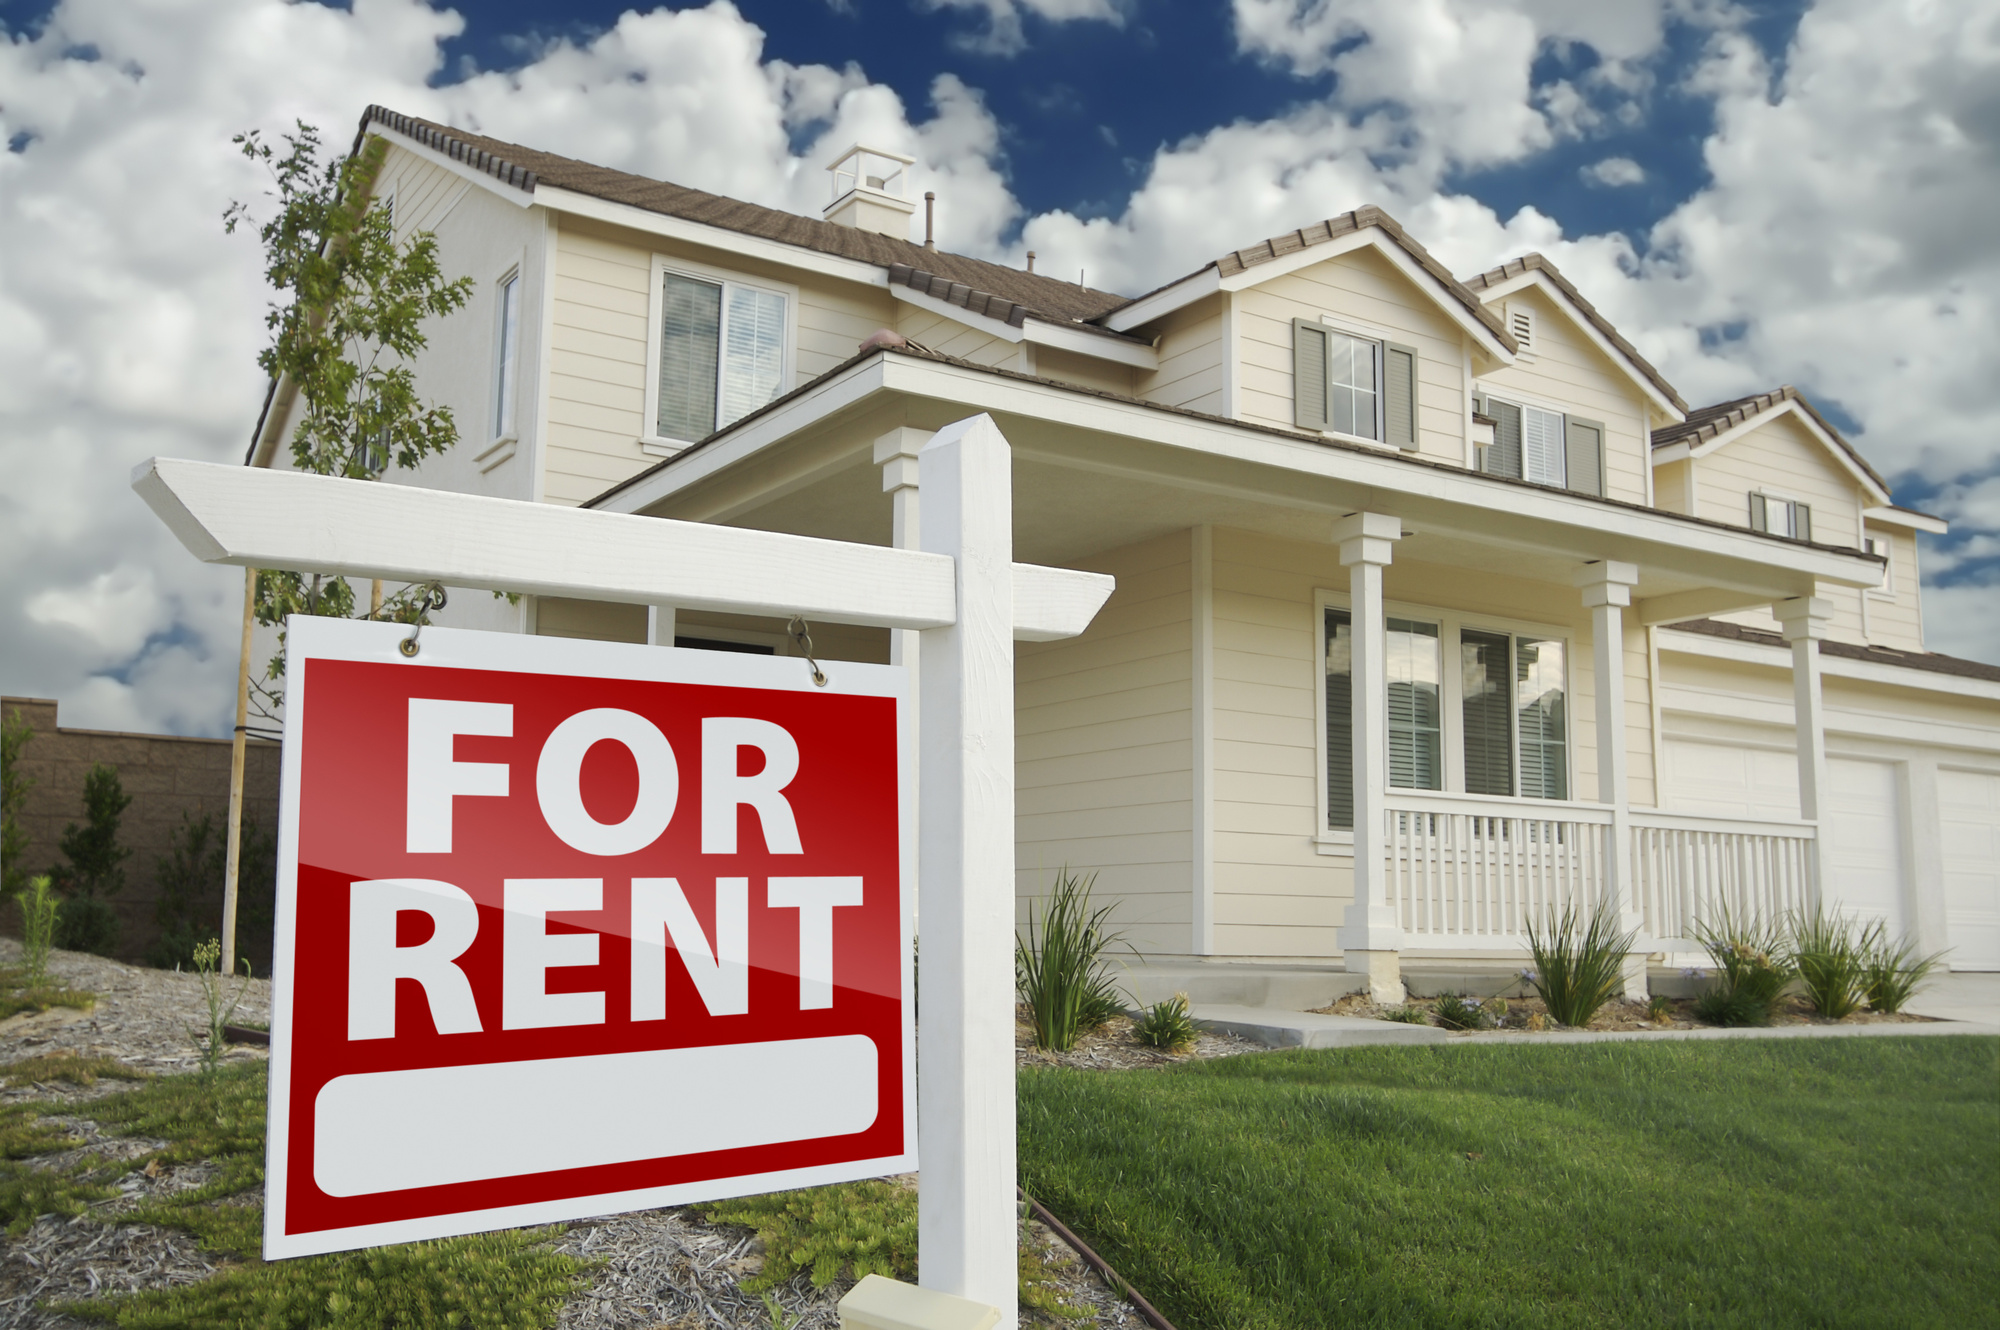 Invest in Rental Property With a Partner